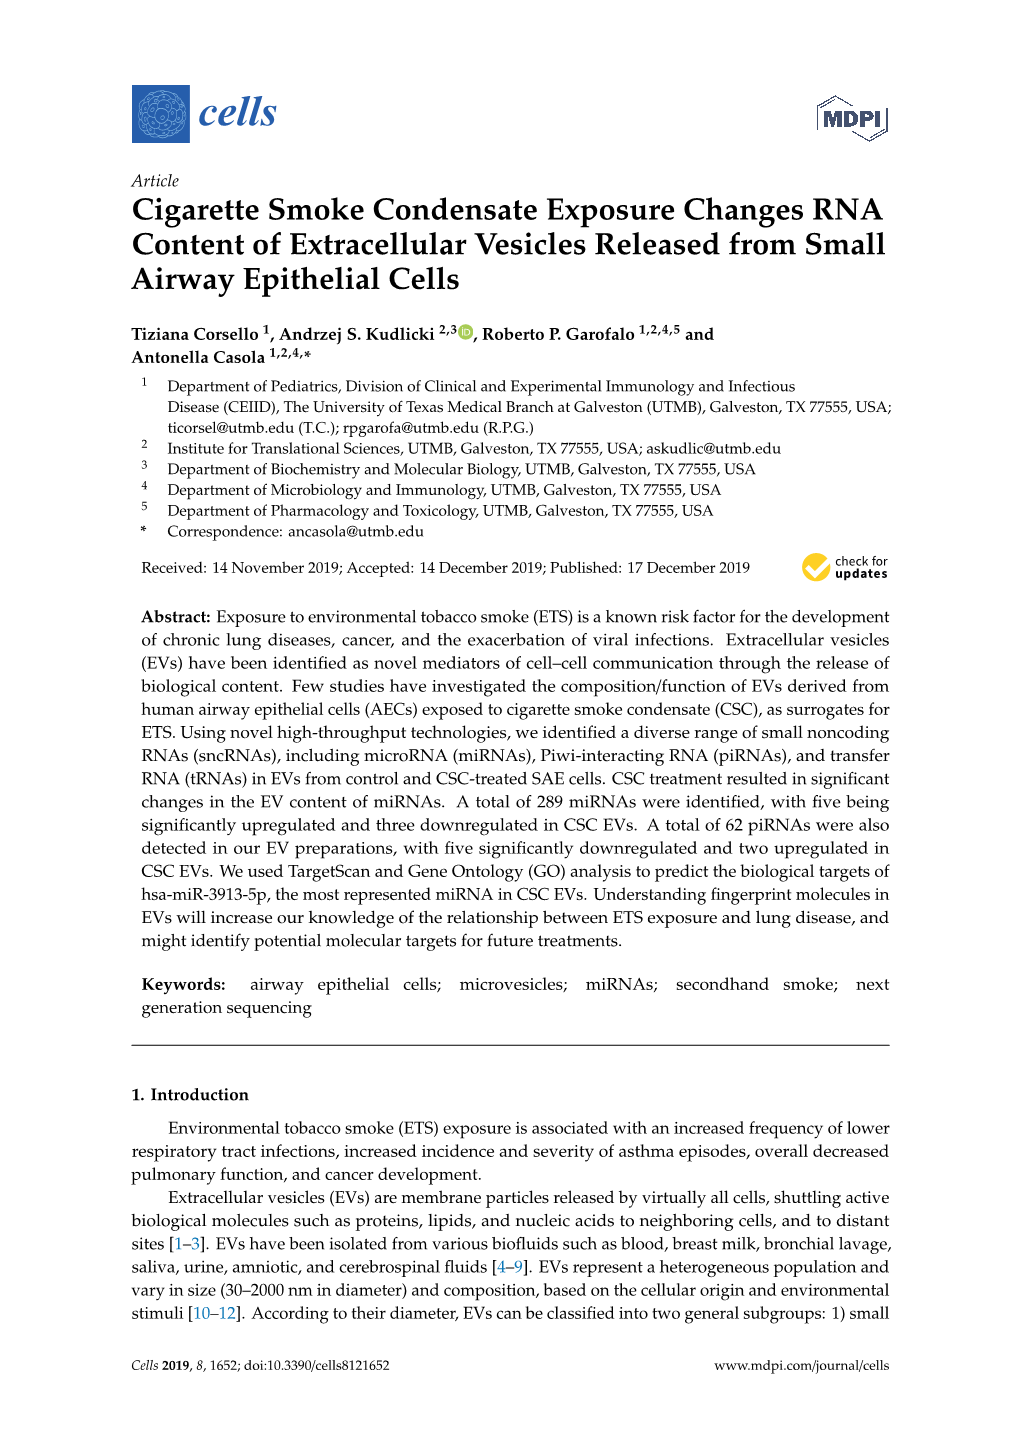 Cigarette Smoke Condensate Exposure Changes RNA Content of Extracellular Vesicles Released from Small Airway Epithelial Cells